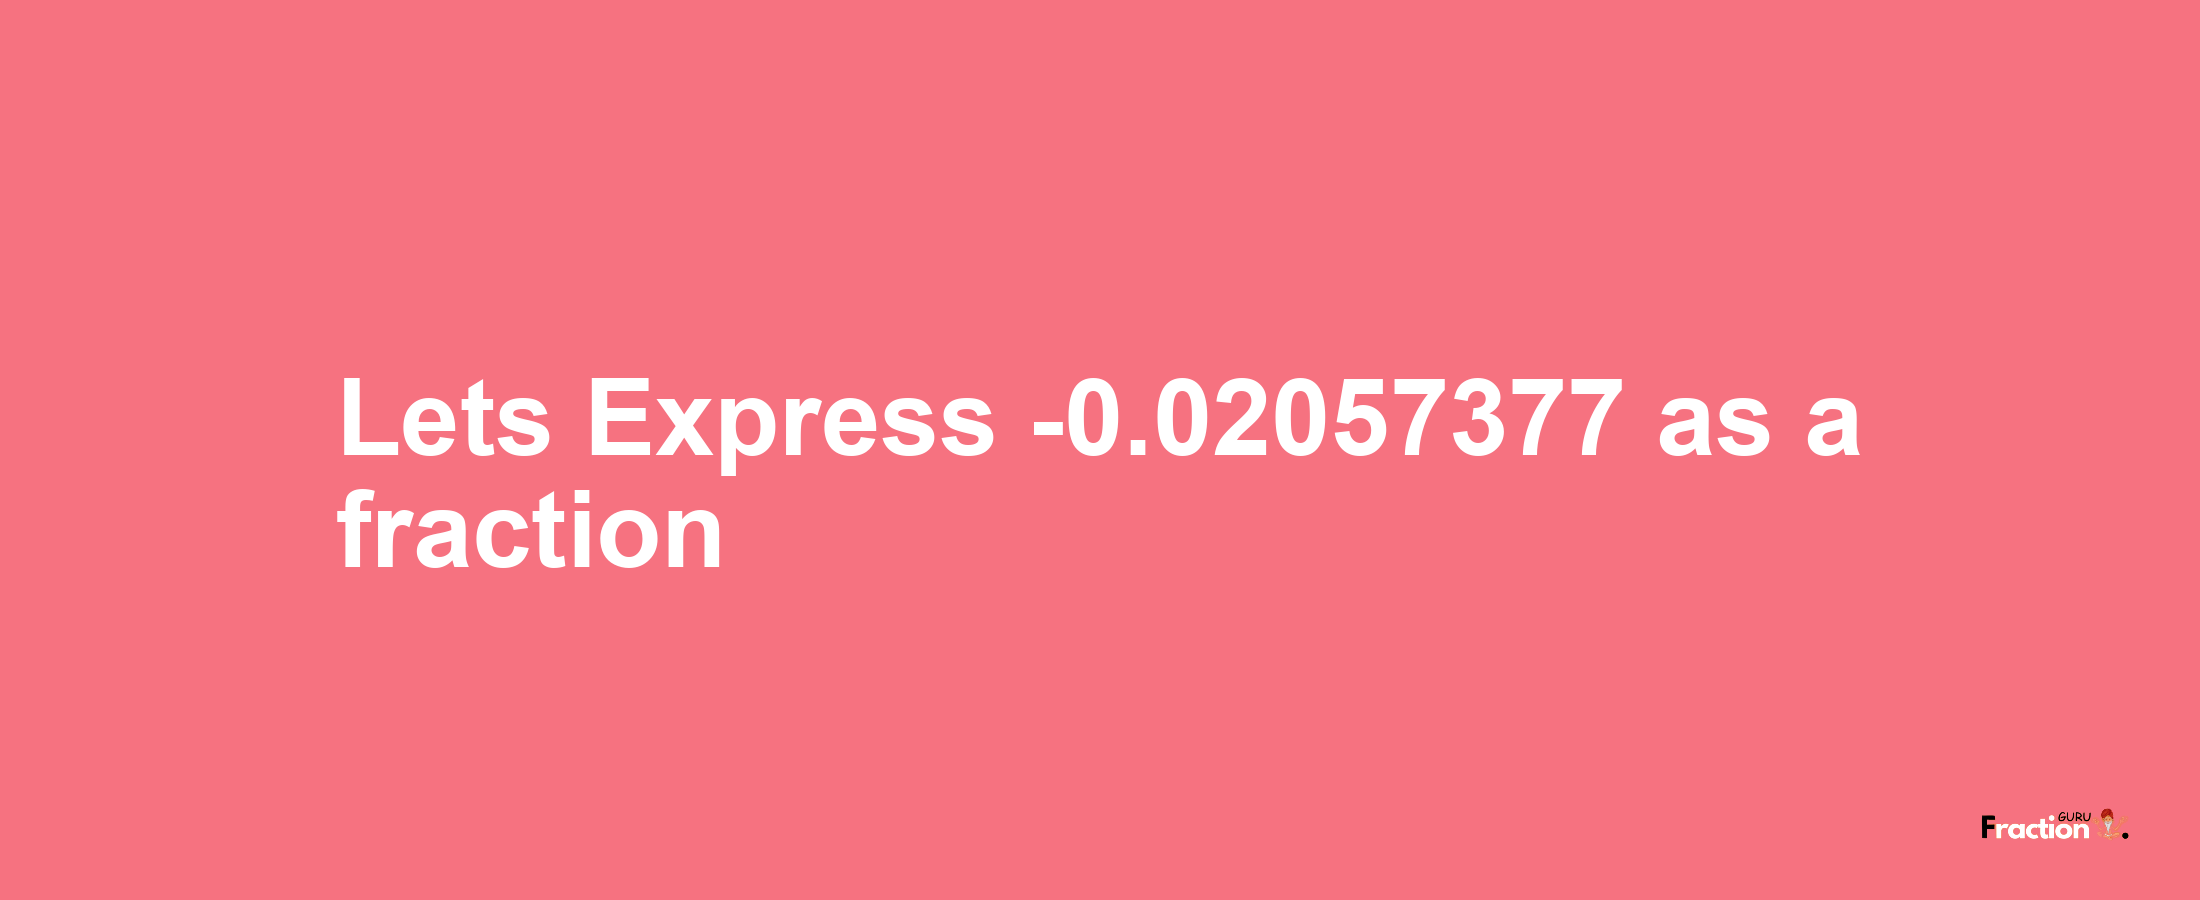 Lets Express -0.02057377 as afraction